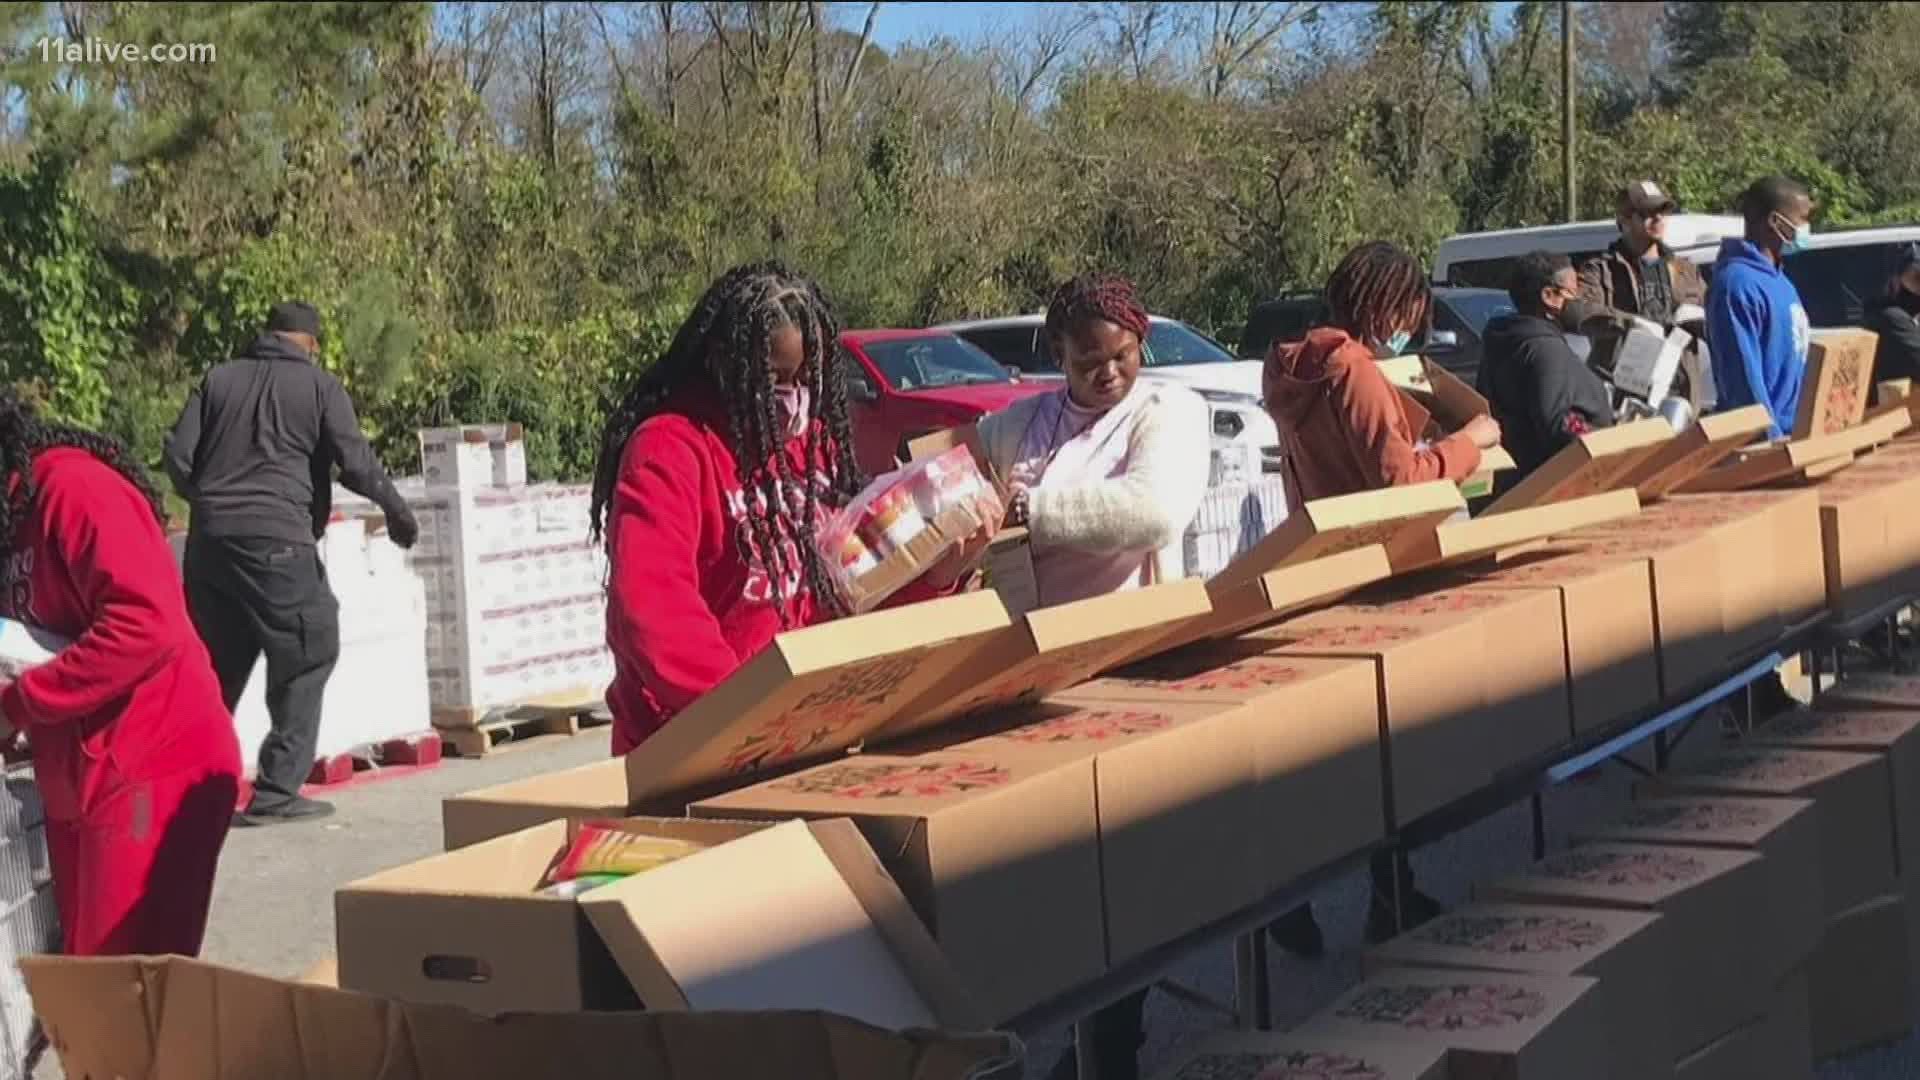 The beloved Atlanta tradition, this pandemic year, will offer boxes of food to those who line up outside the Georgia World Congress Center.